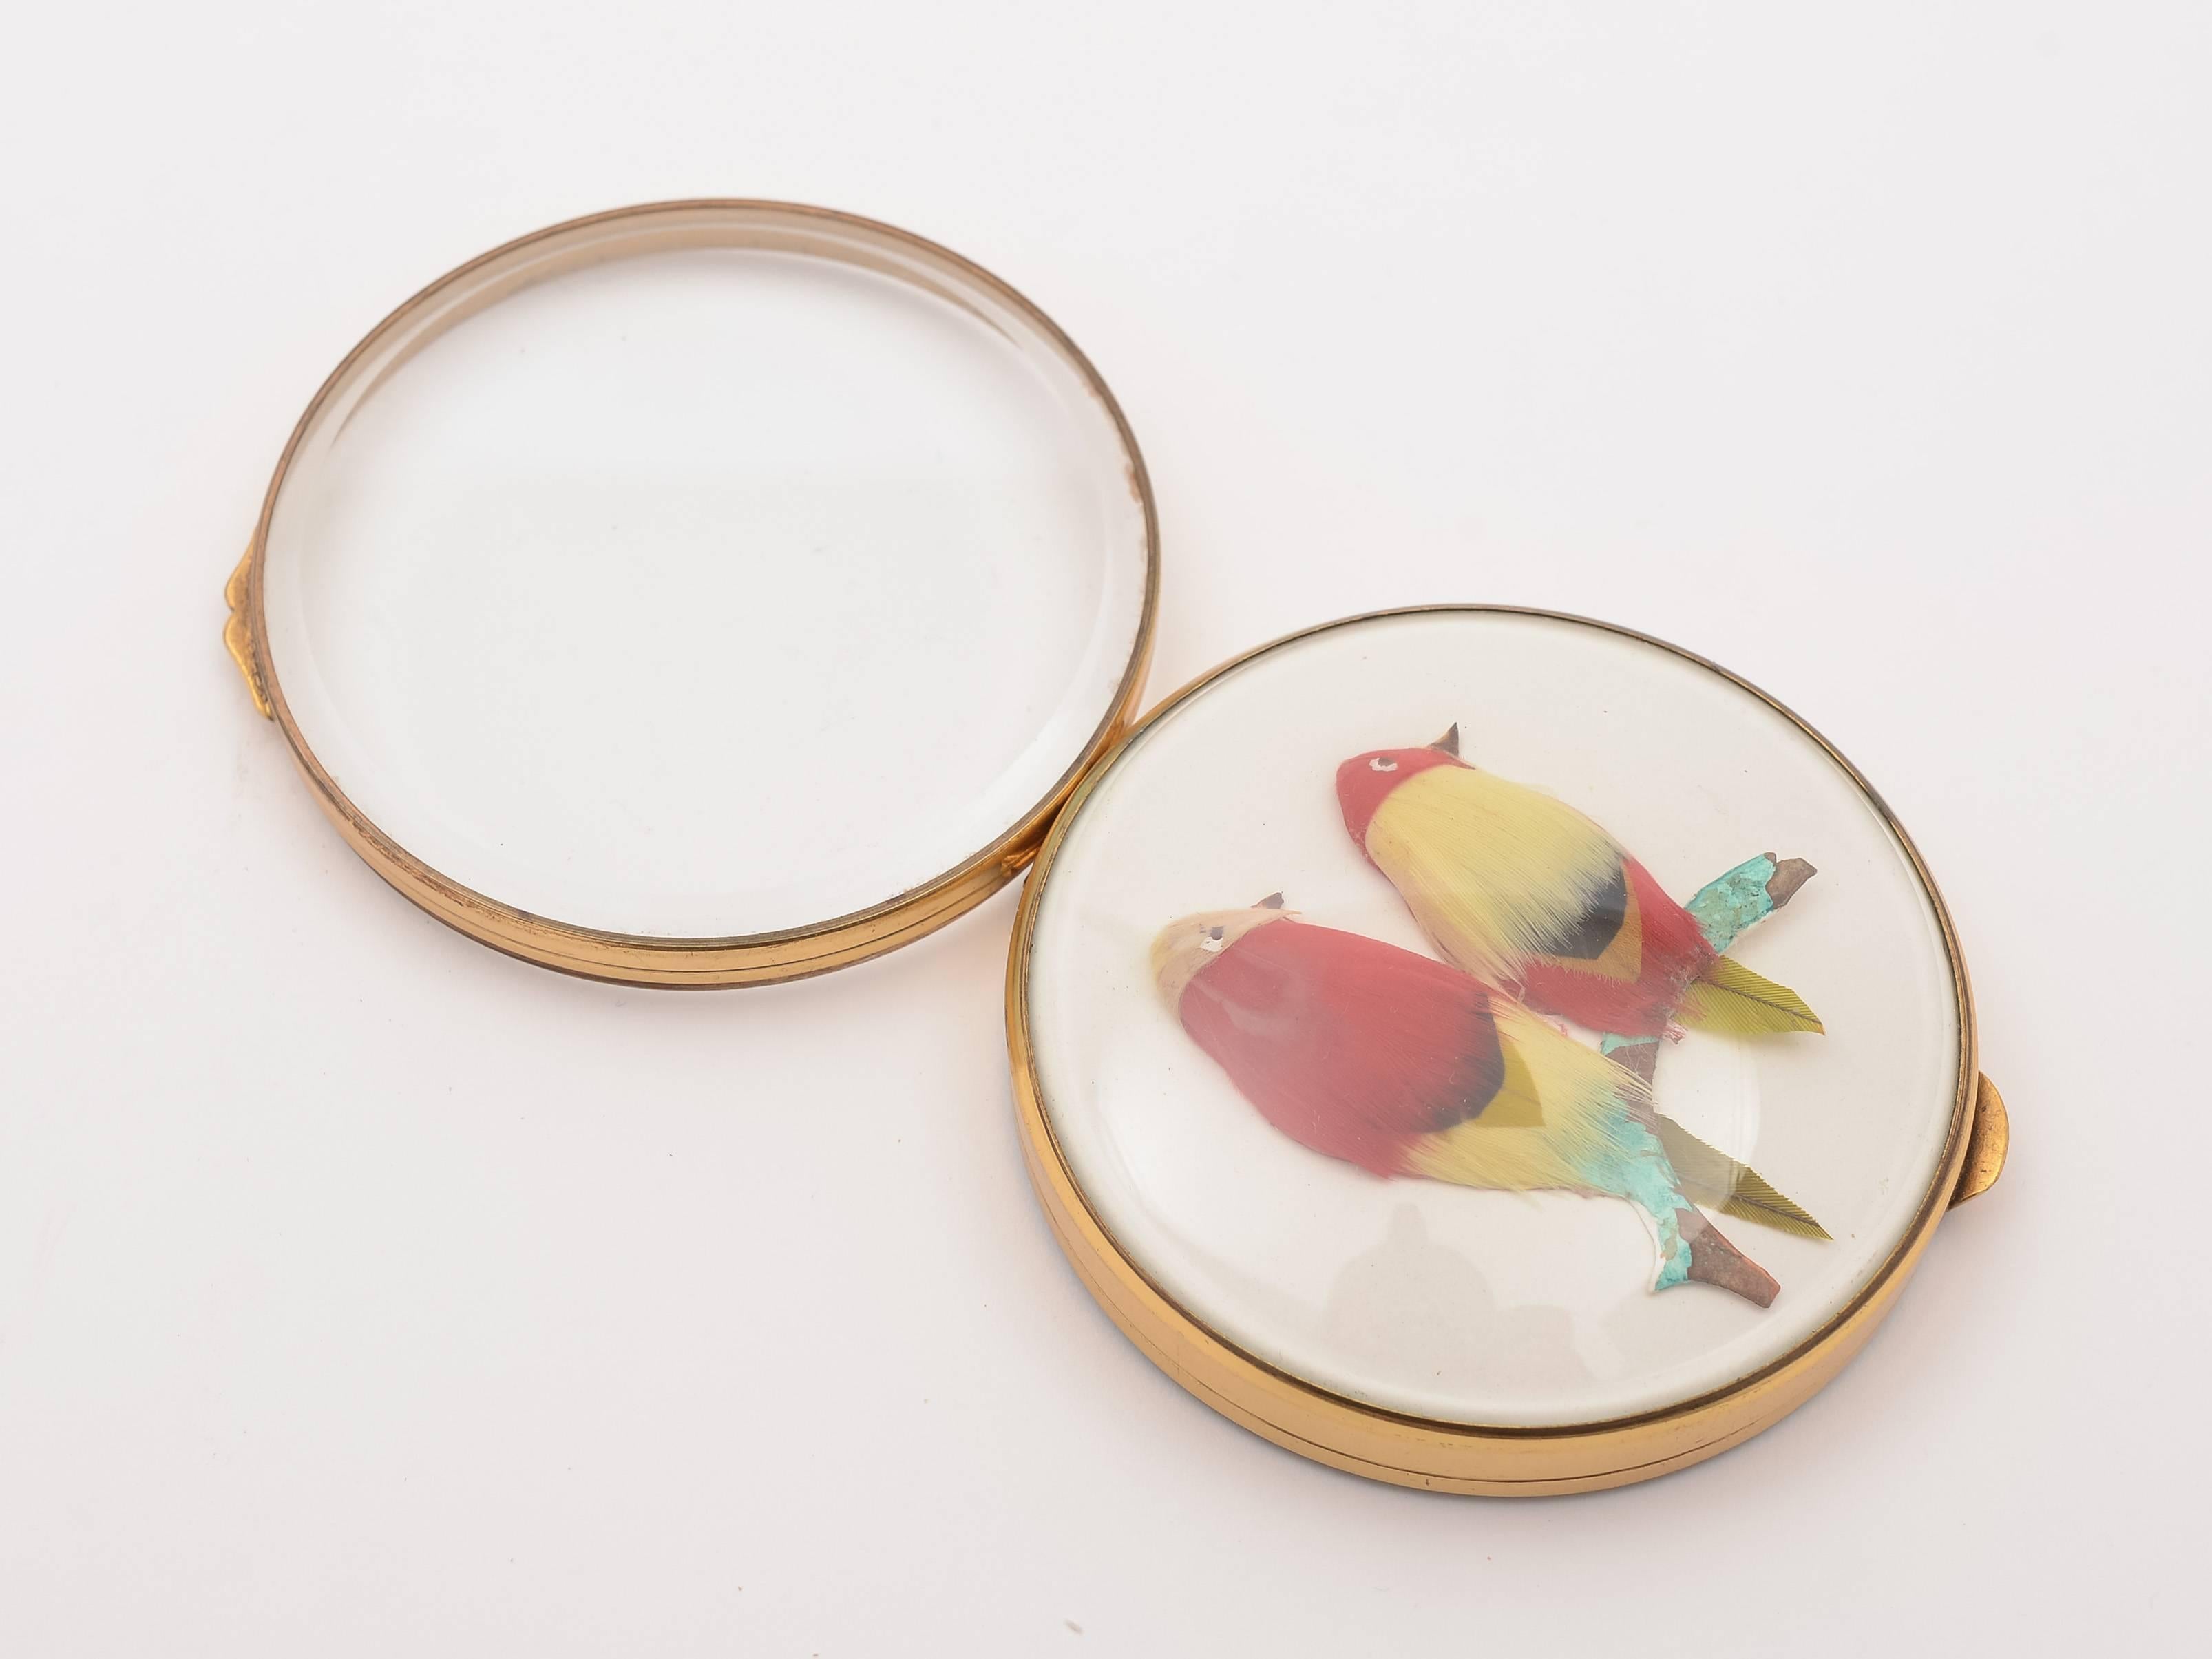 European 20th Century Brass and Glass Mirror Compact, circa 1920 For Sale